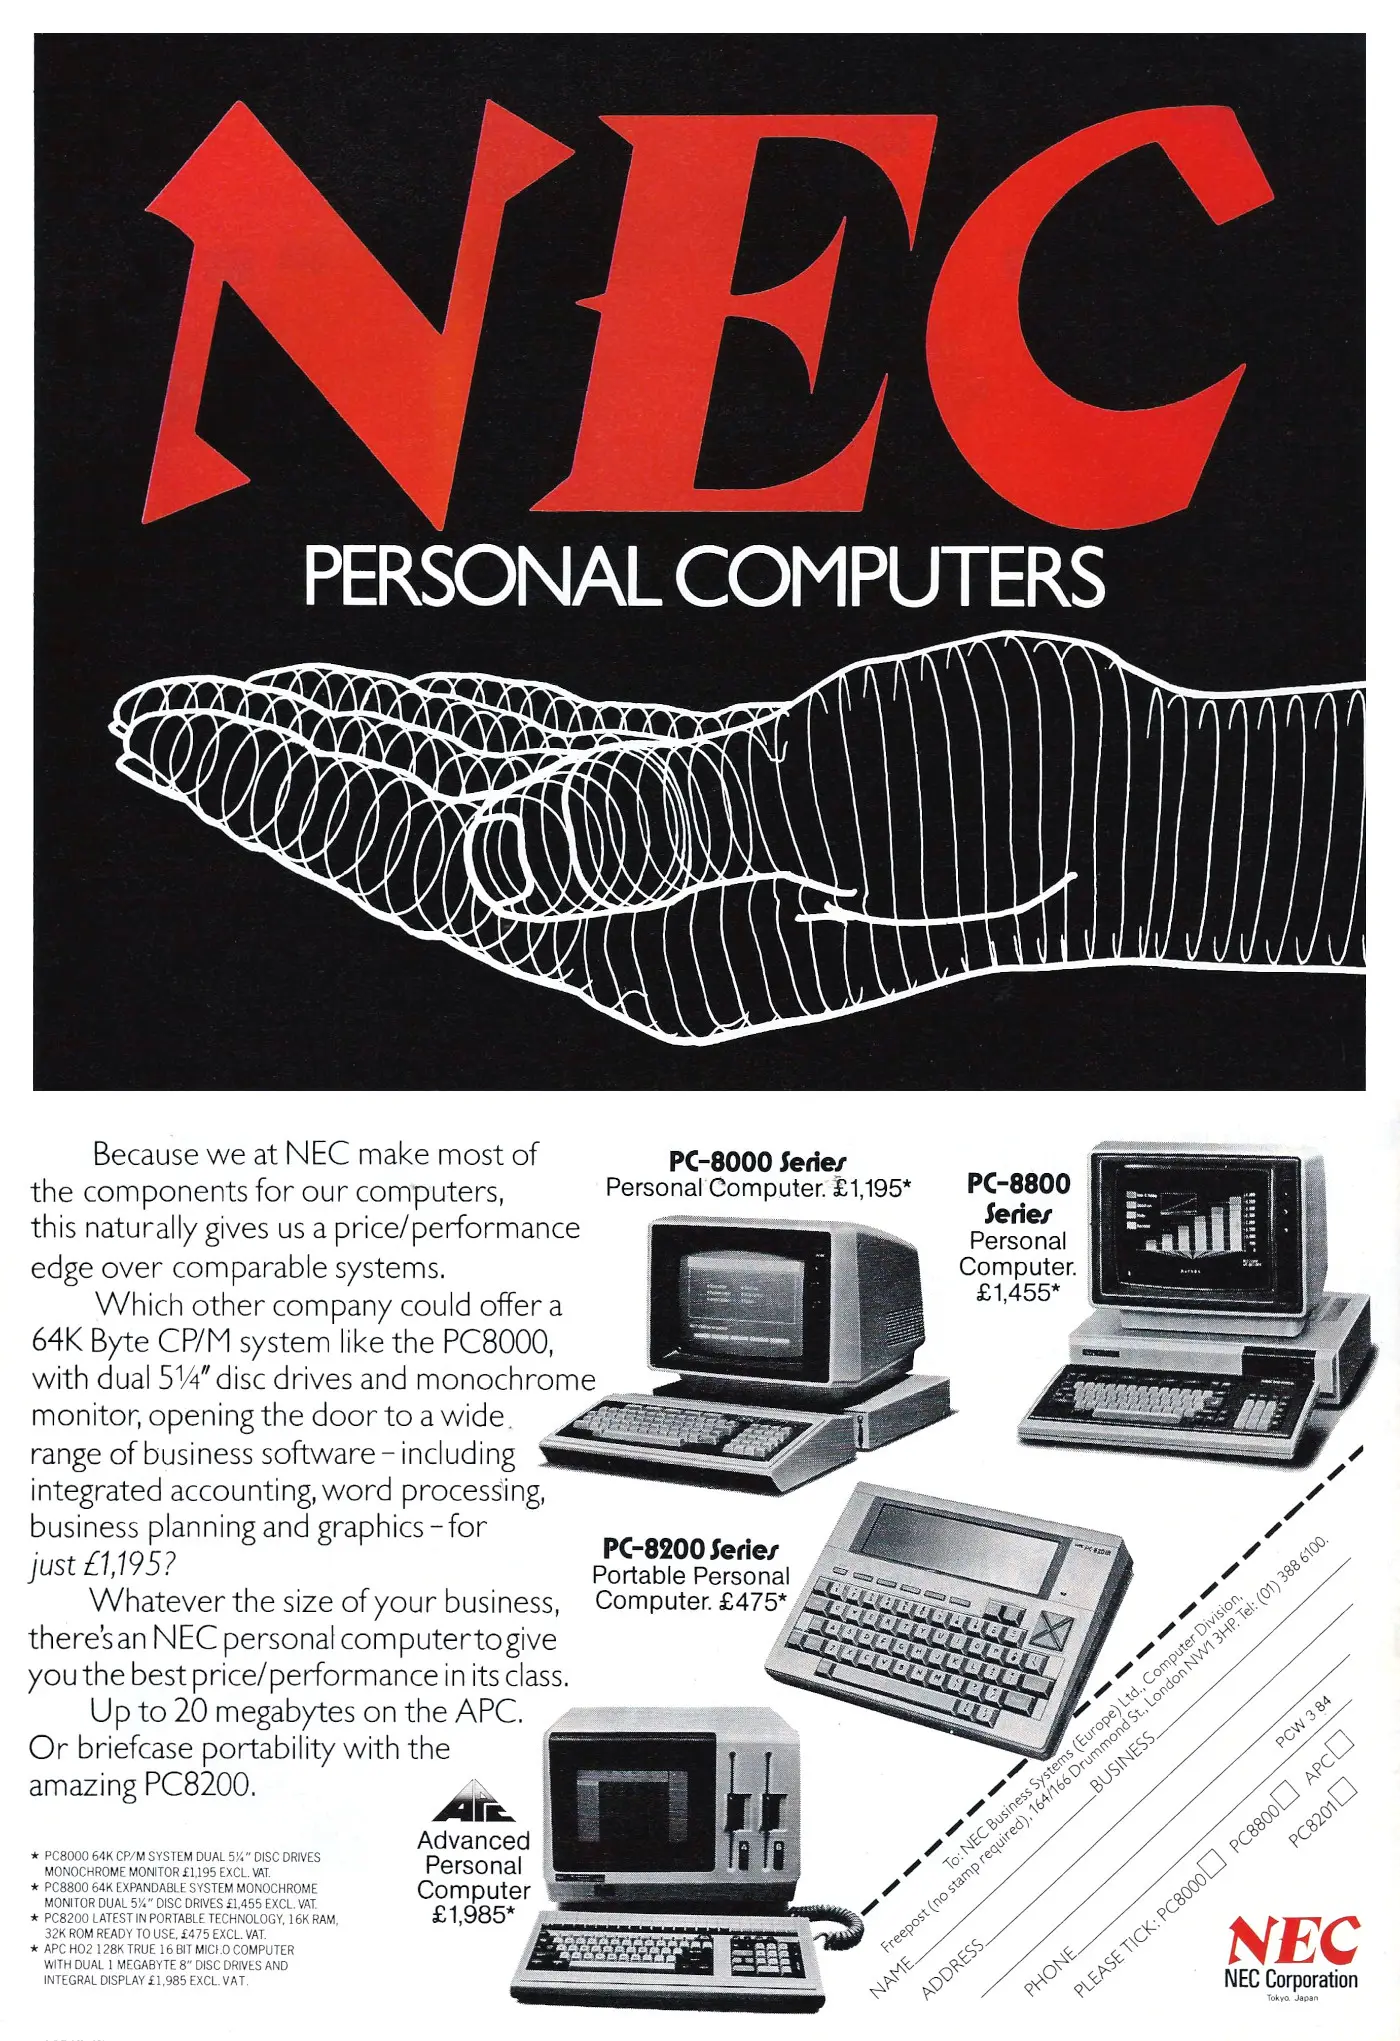 NEC Advert: NEC personal computers, from Personal Computer World, March 1984